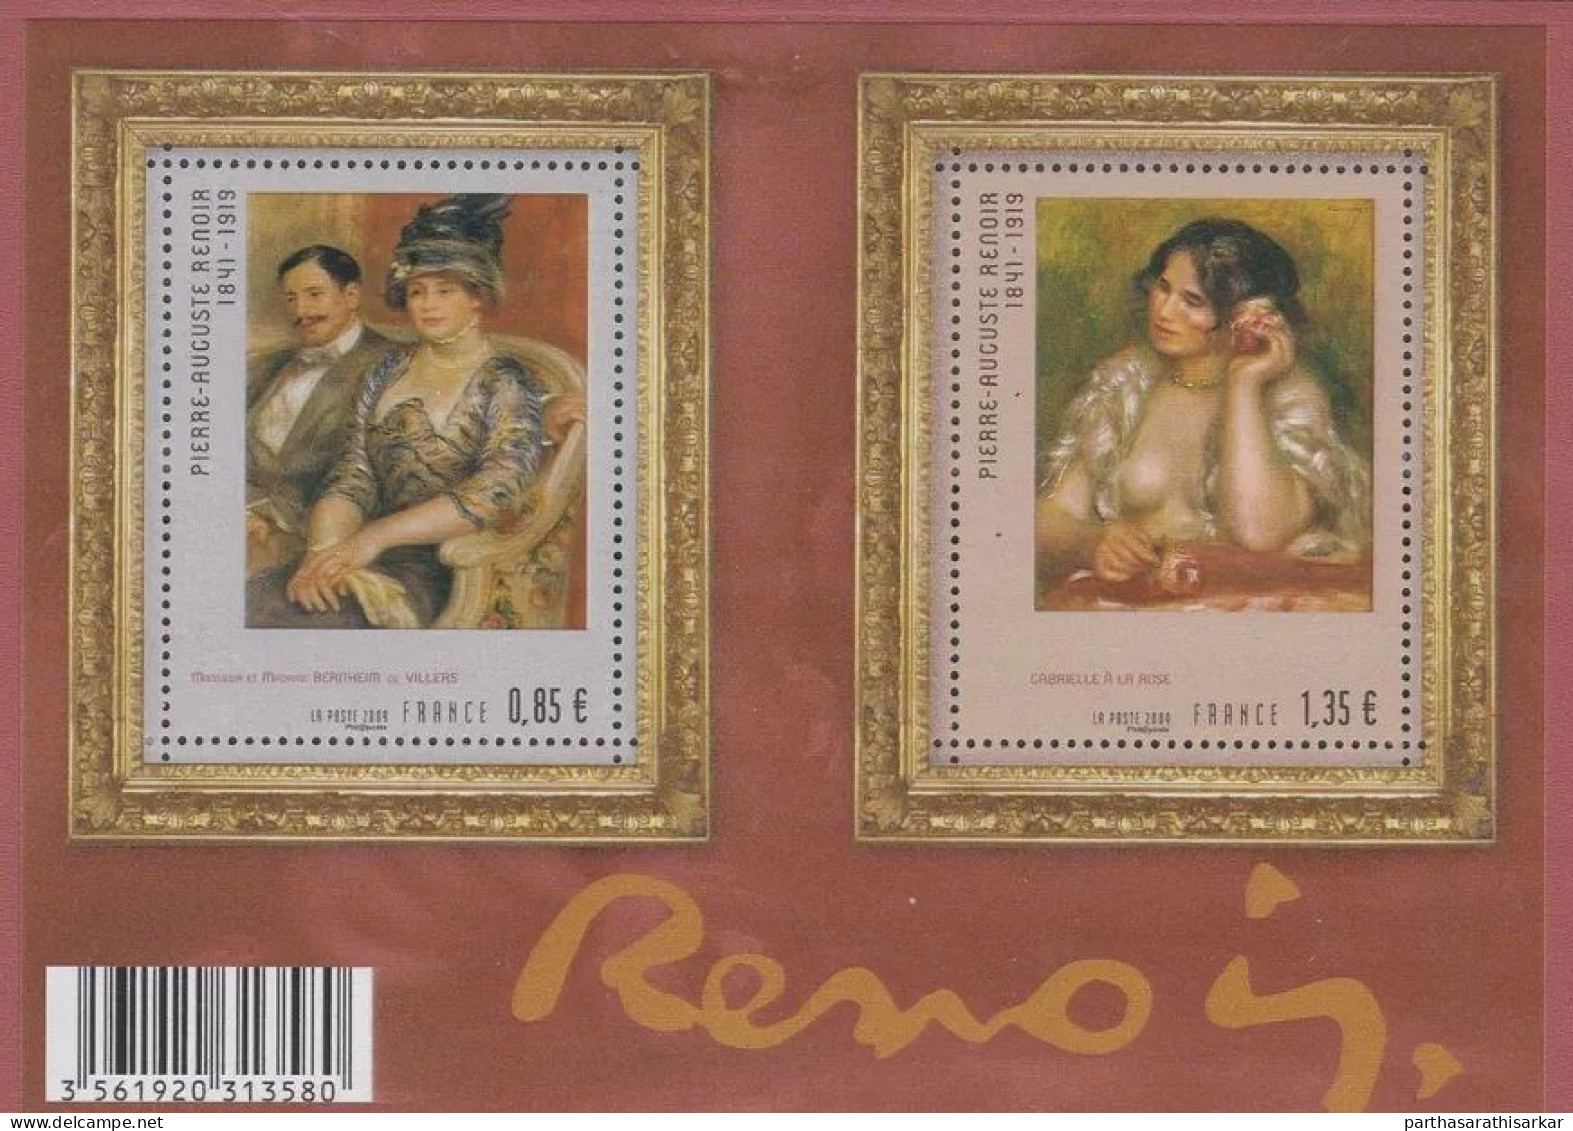 FRANCE 2009 THE 90TH ANNIVERSARY OF THE DEATH OF PIERRE-AUGUSTE RENOIR, 1841-1919 PAINTINGS MINIATURE SHEET MS MNH - Unused Stamps